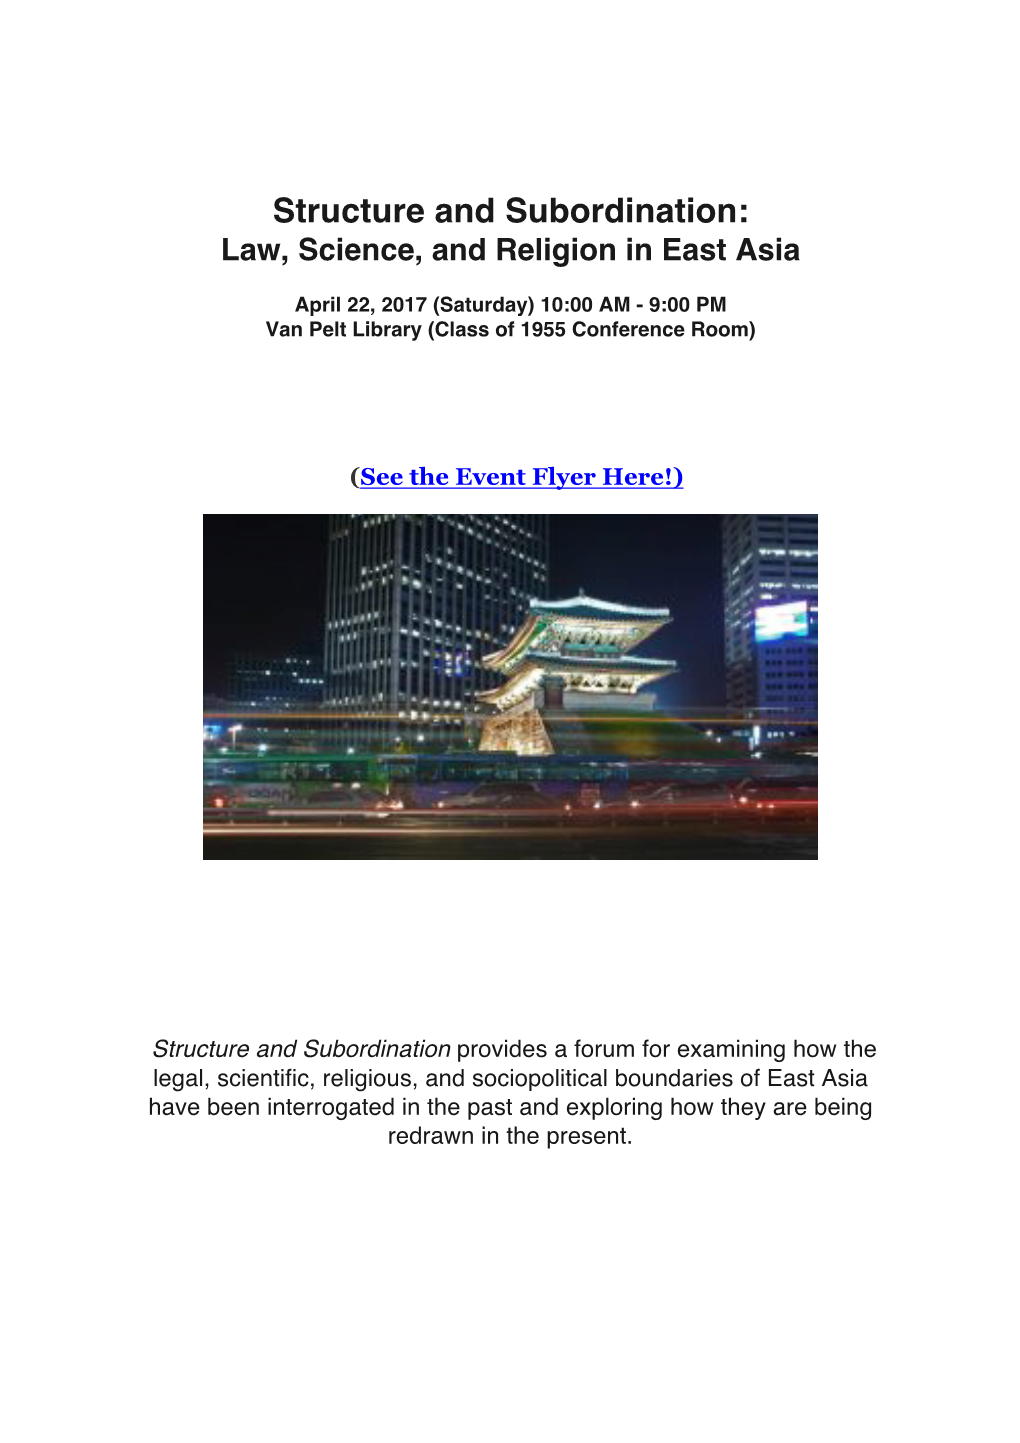 Structure and Subordination: Law, Science, and Religion in East Asia